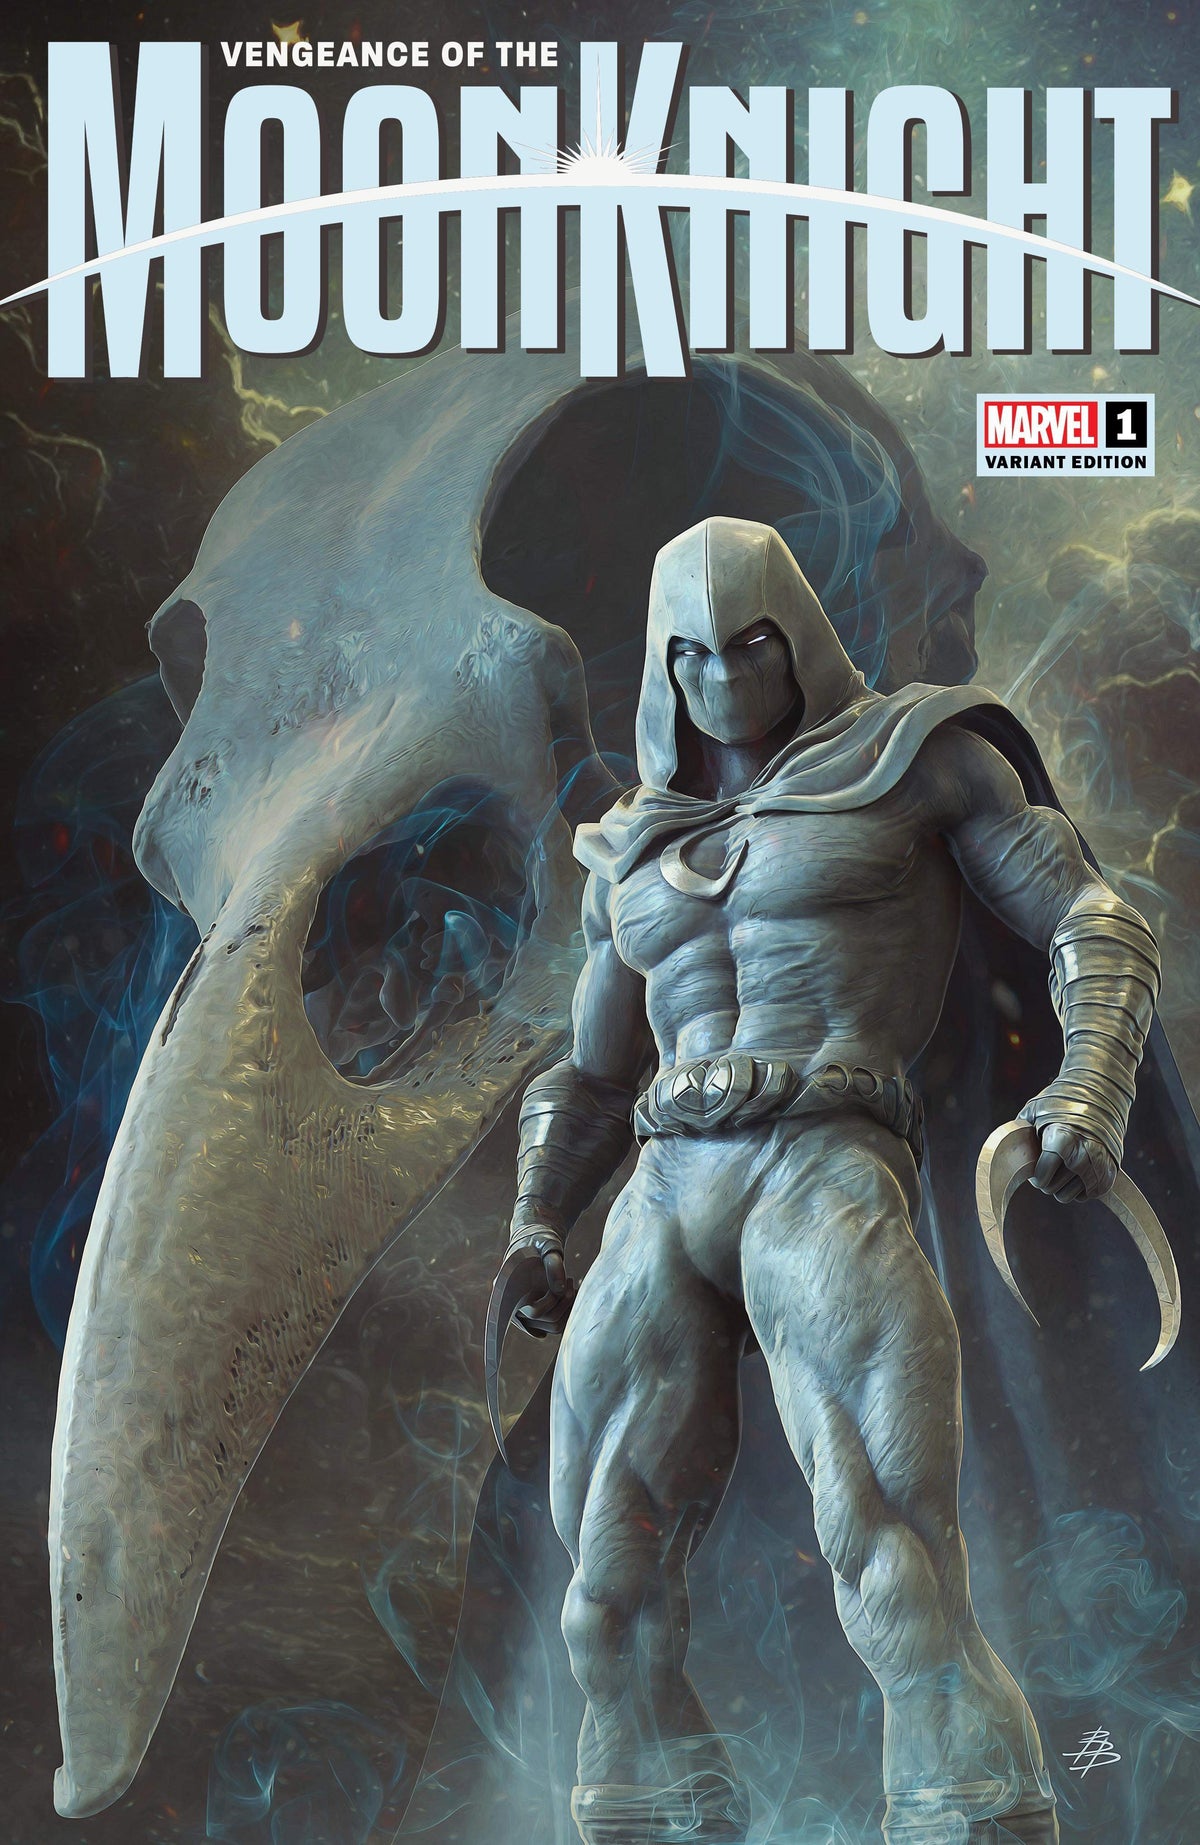 VENGEANCE OF MOON KNIGHT #1 - EXCLUSIVE - BARENDS - LIMITED 600 COA